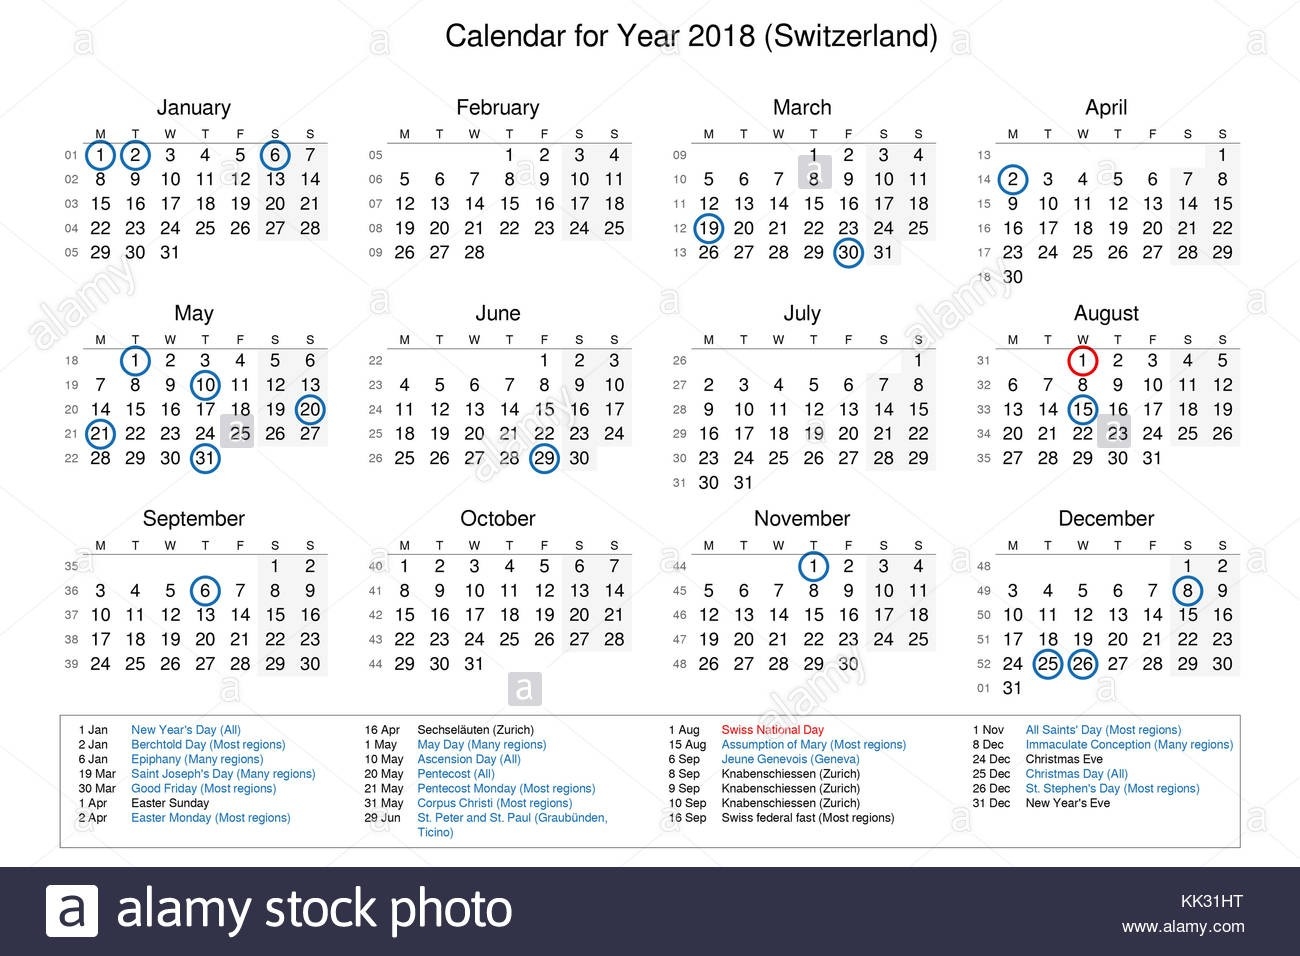 Calendar Of Year 2018 With Public Holidays And Bank Holidays-Bank Holidays In Zurich